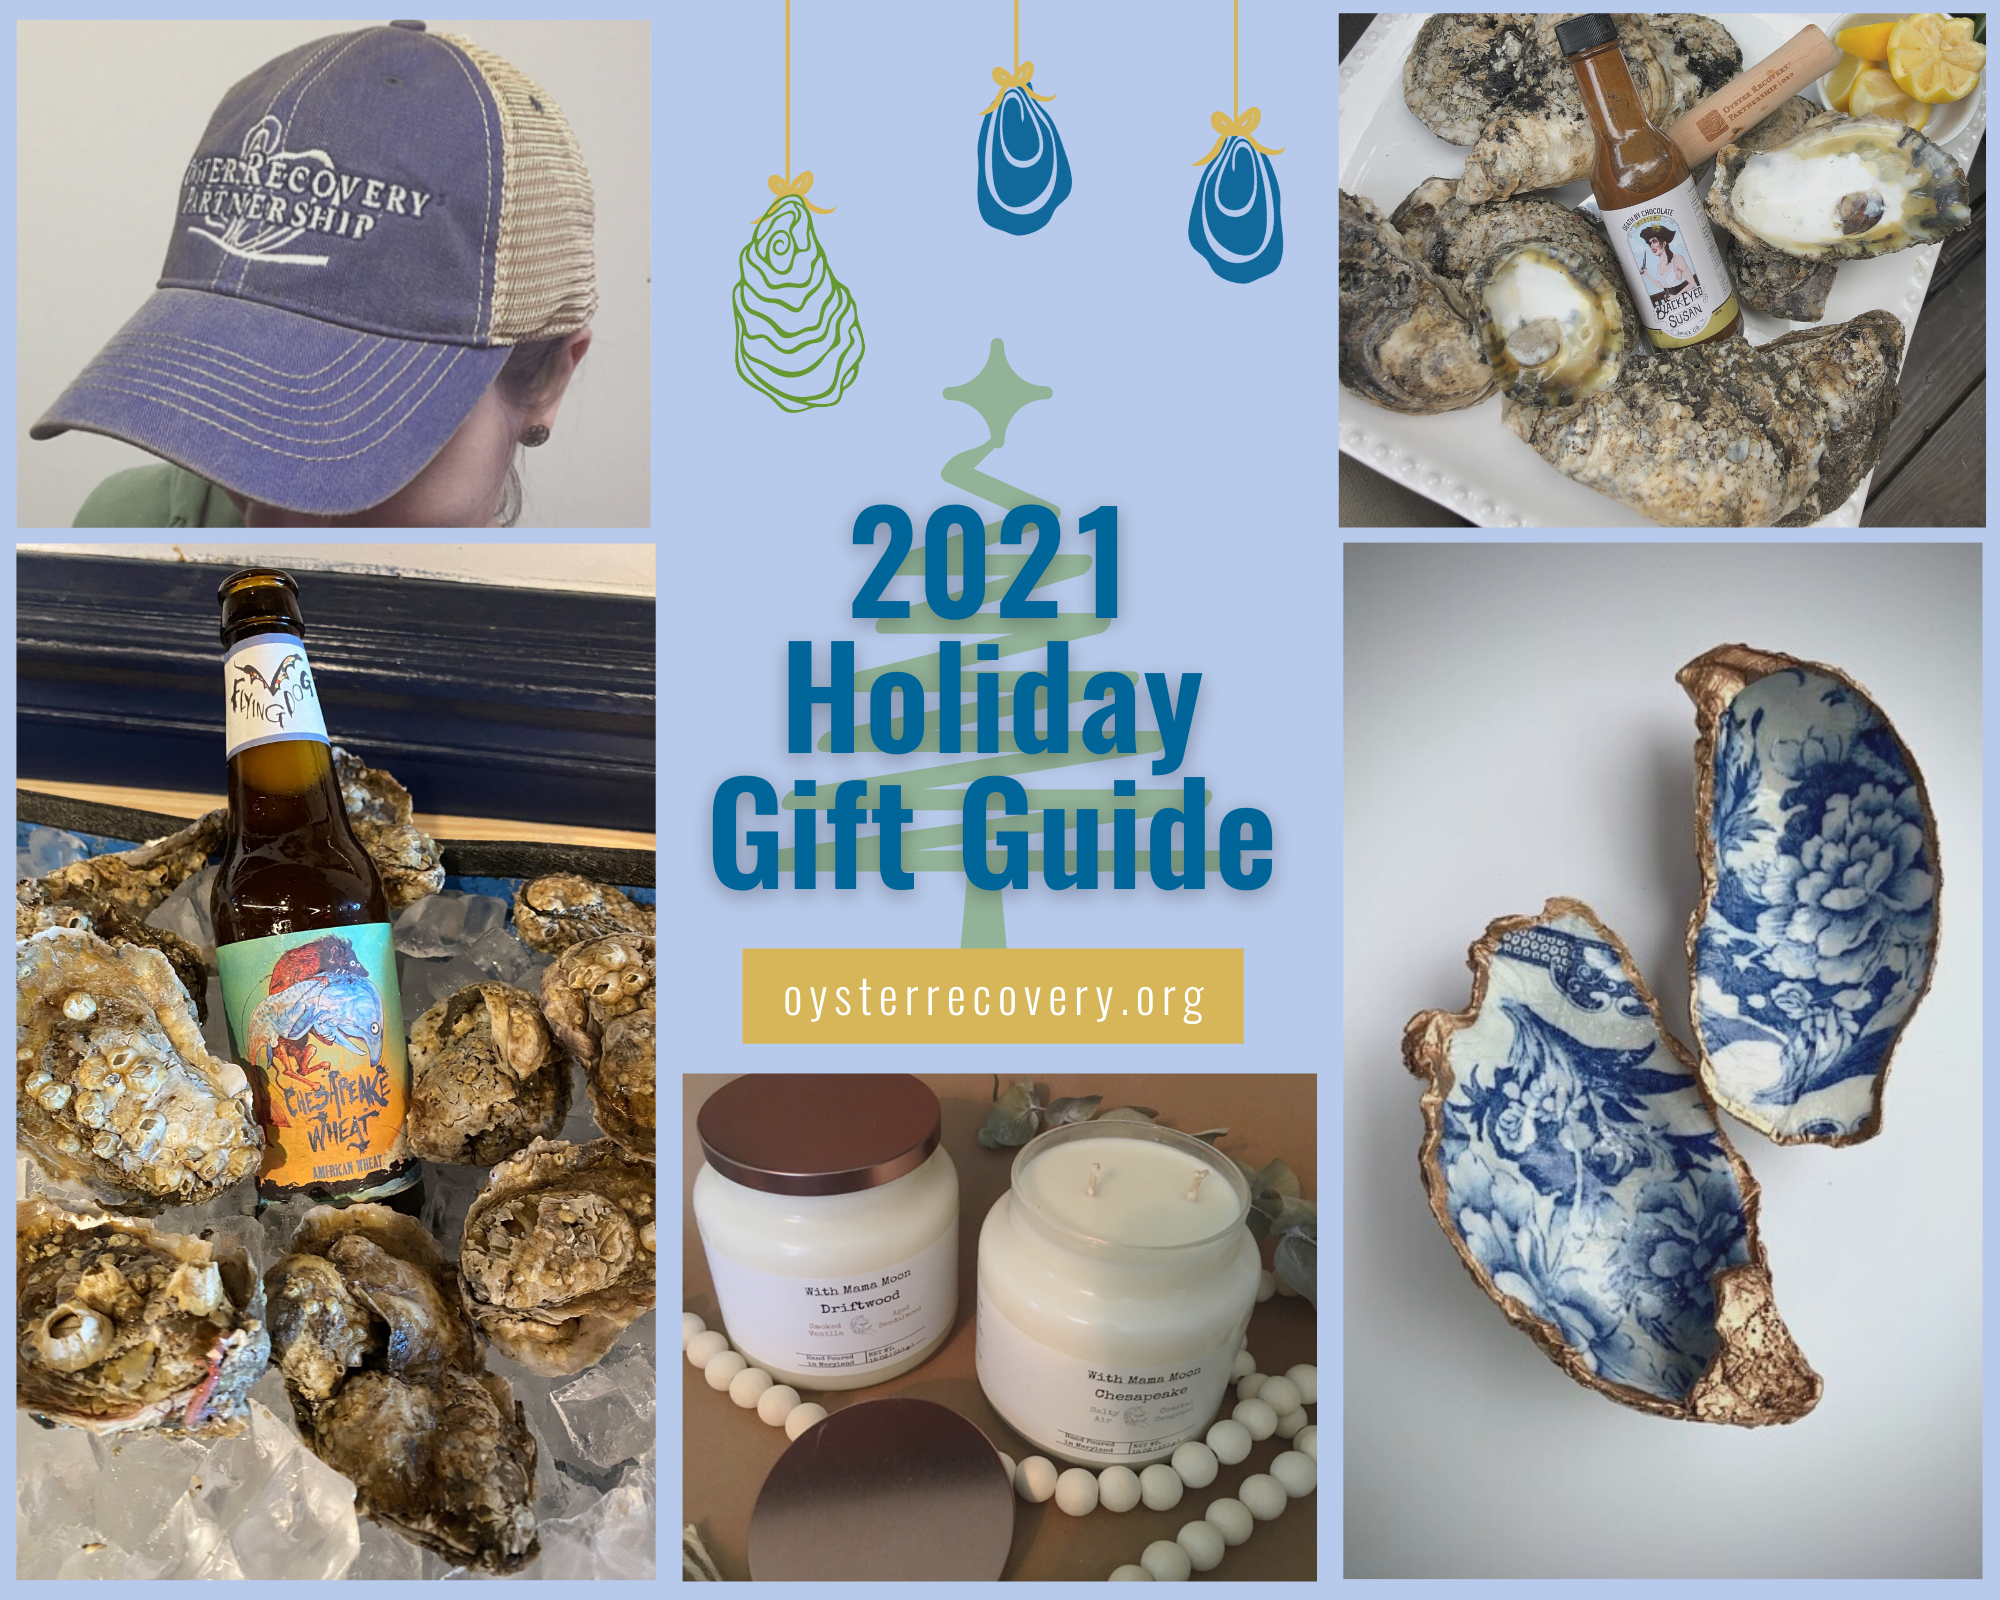 2021 Holiday Gift Guide (1)